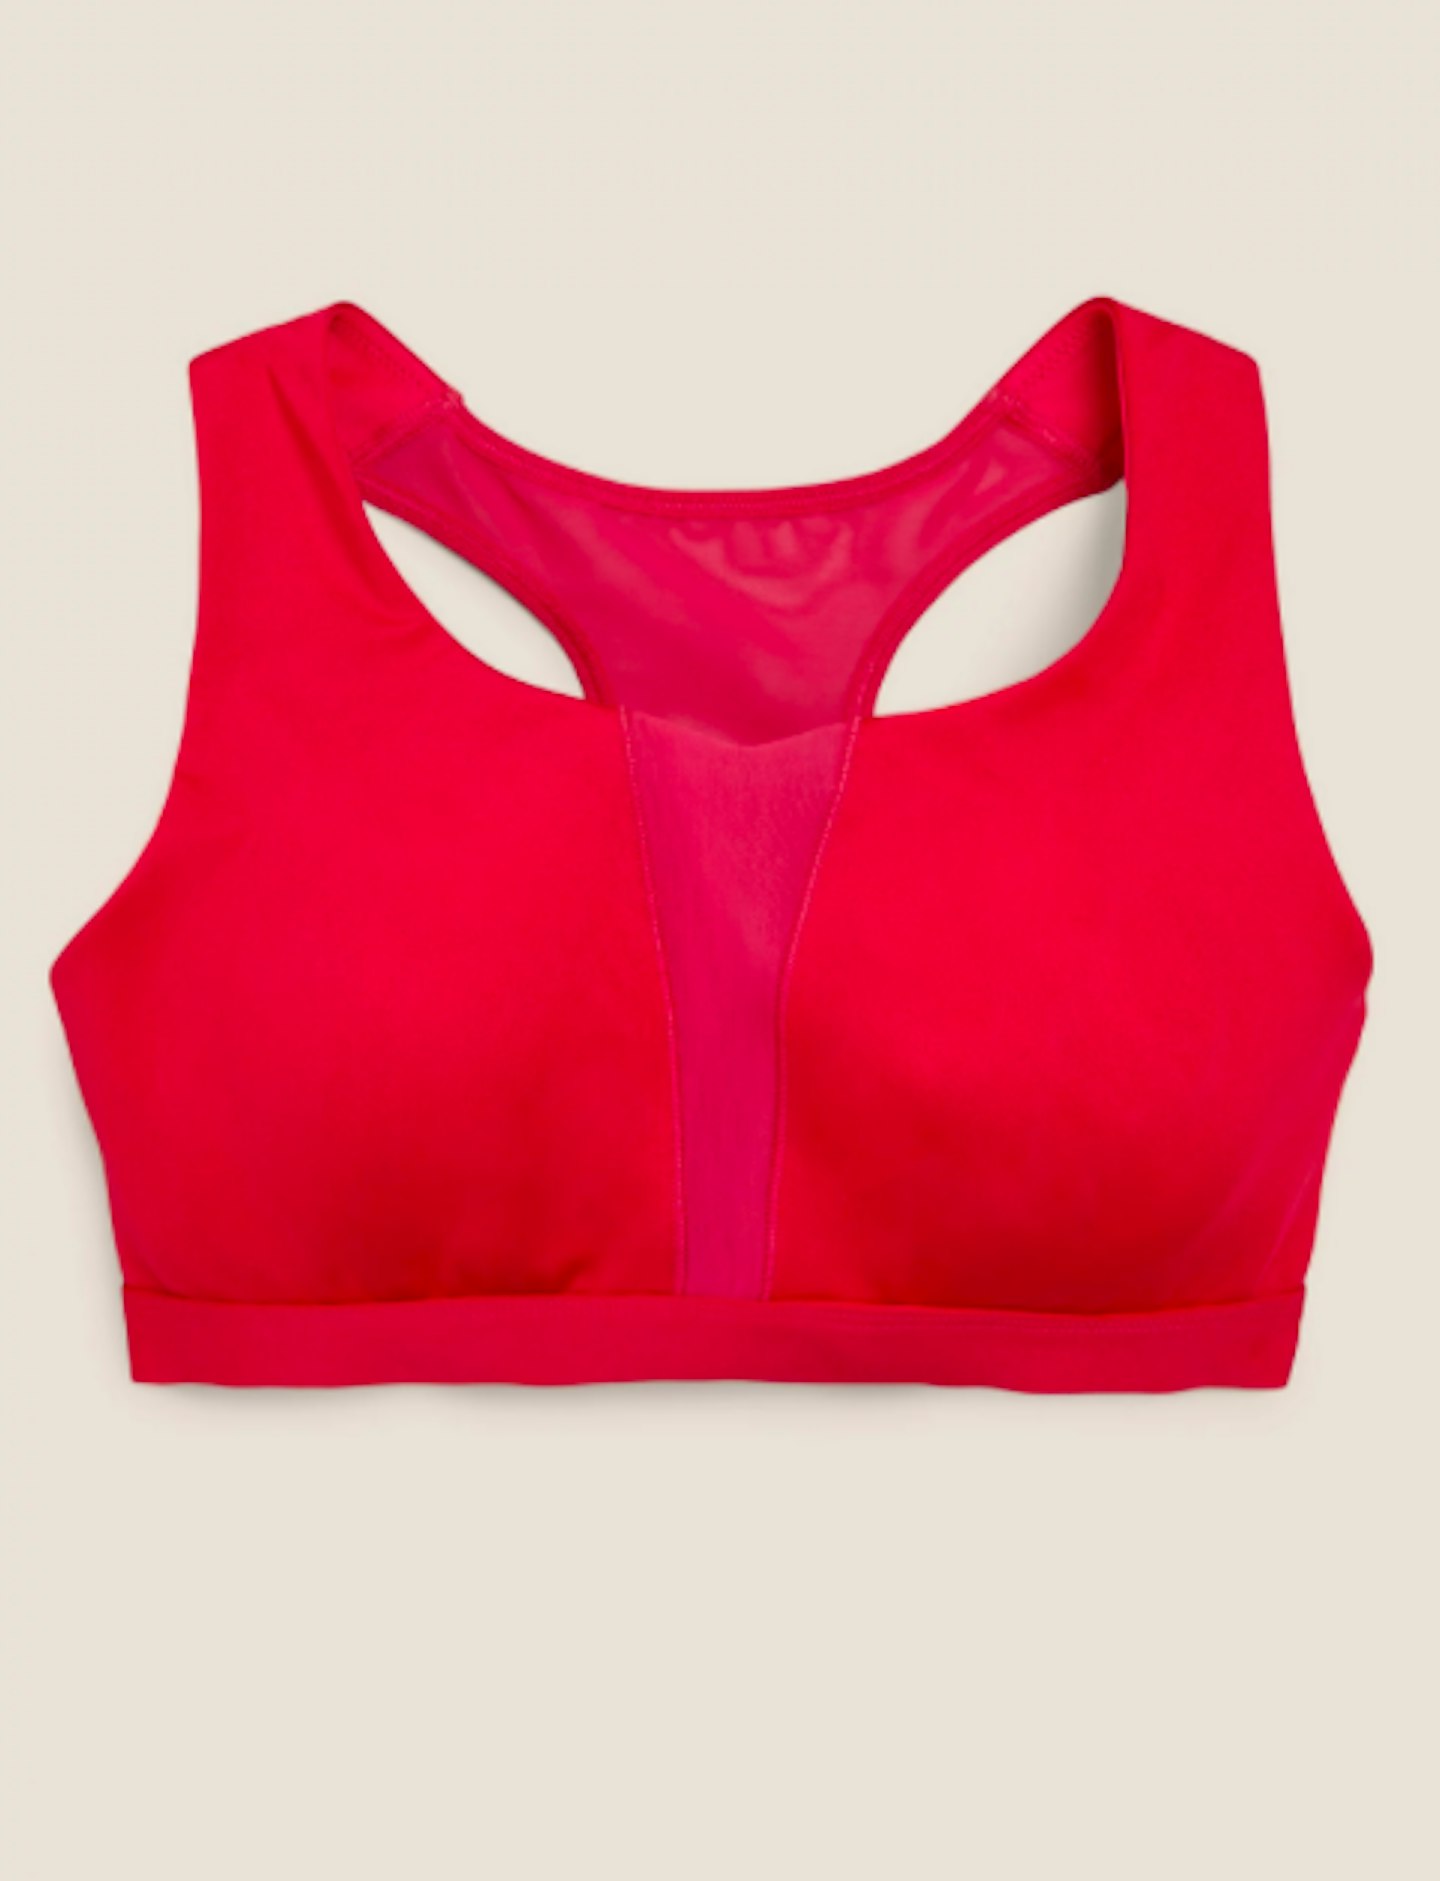 M&S - Cheshire Oaks - Get fitted from home! Try our online bra fit